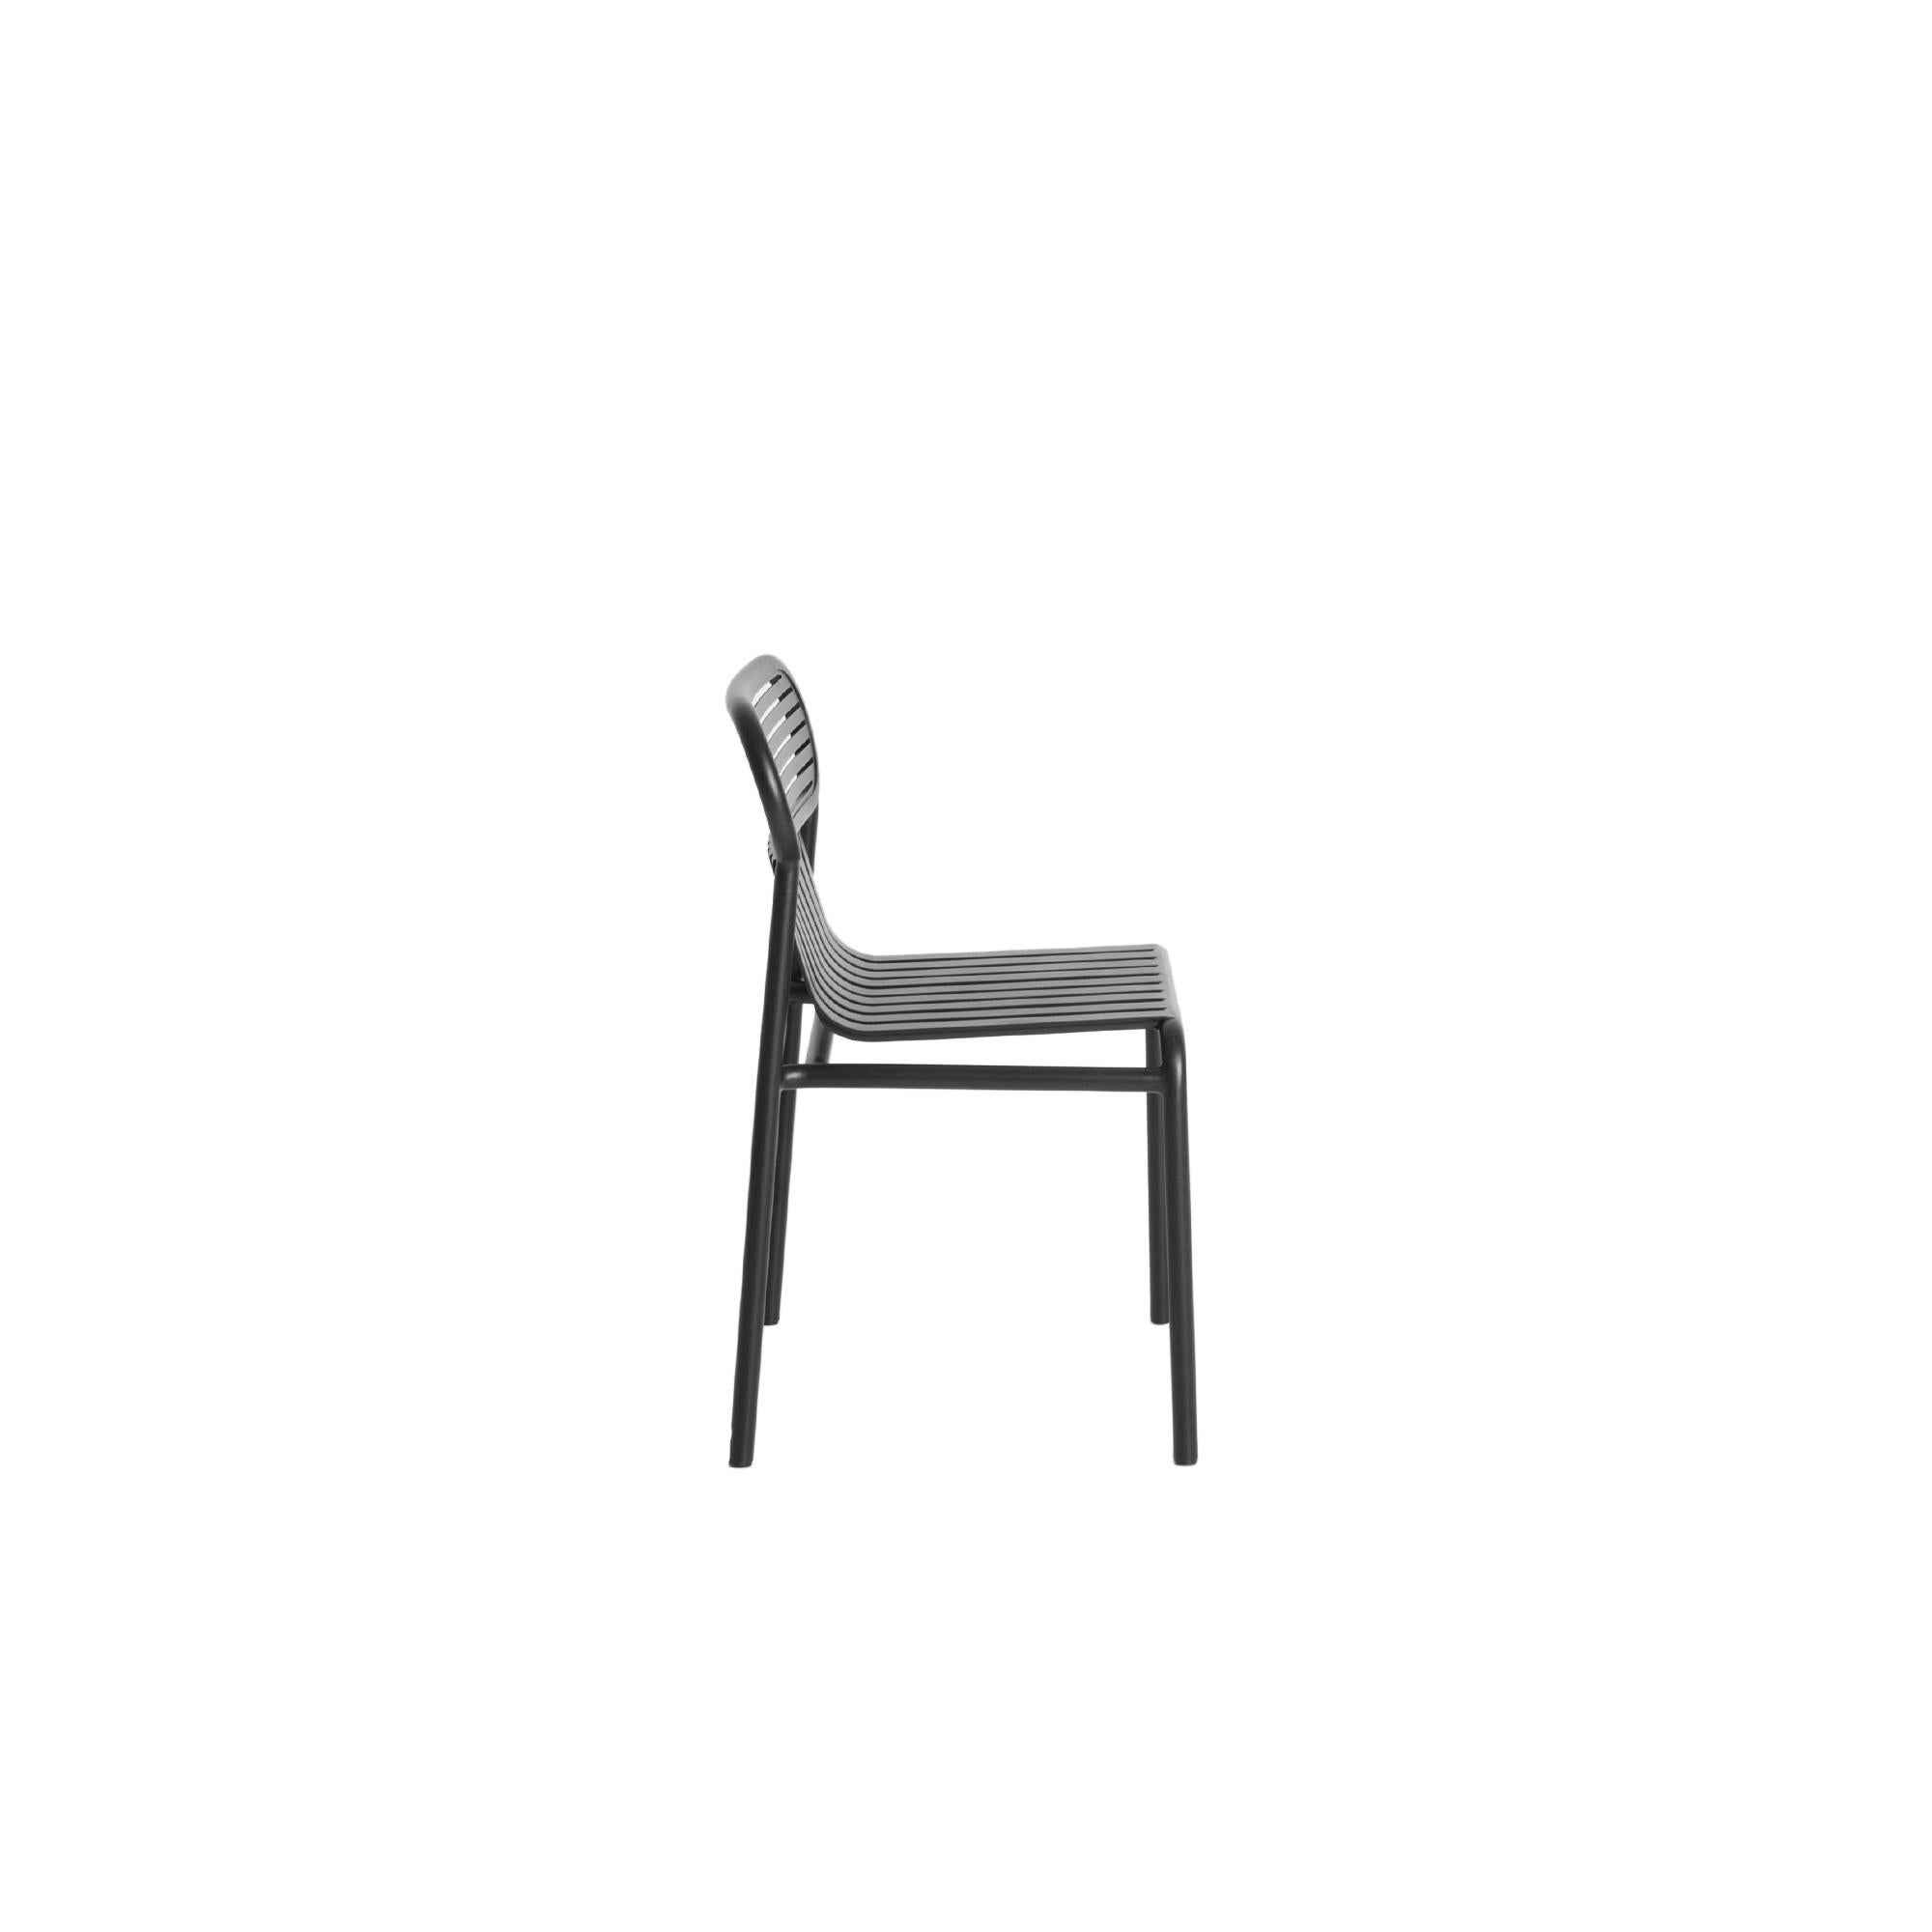 Chinese Petite Friture Week-End Chair in Black Aluminium by Studio BrichetZiegler For Sale